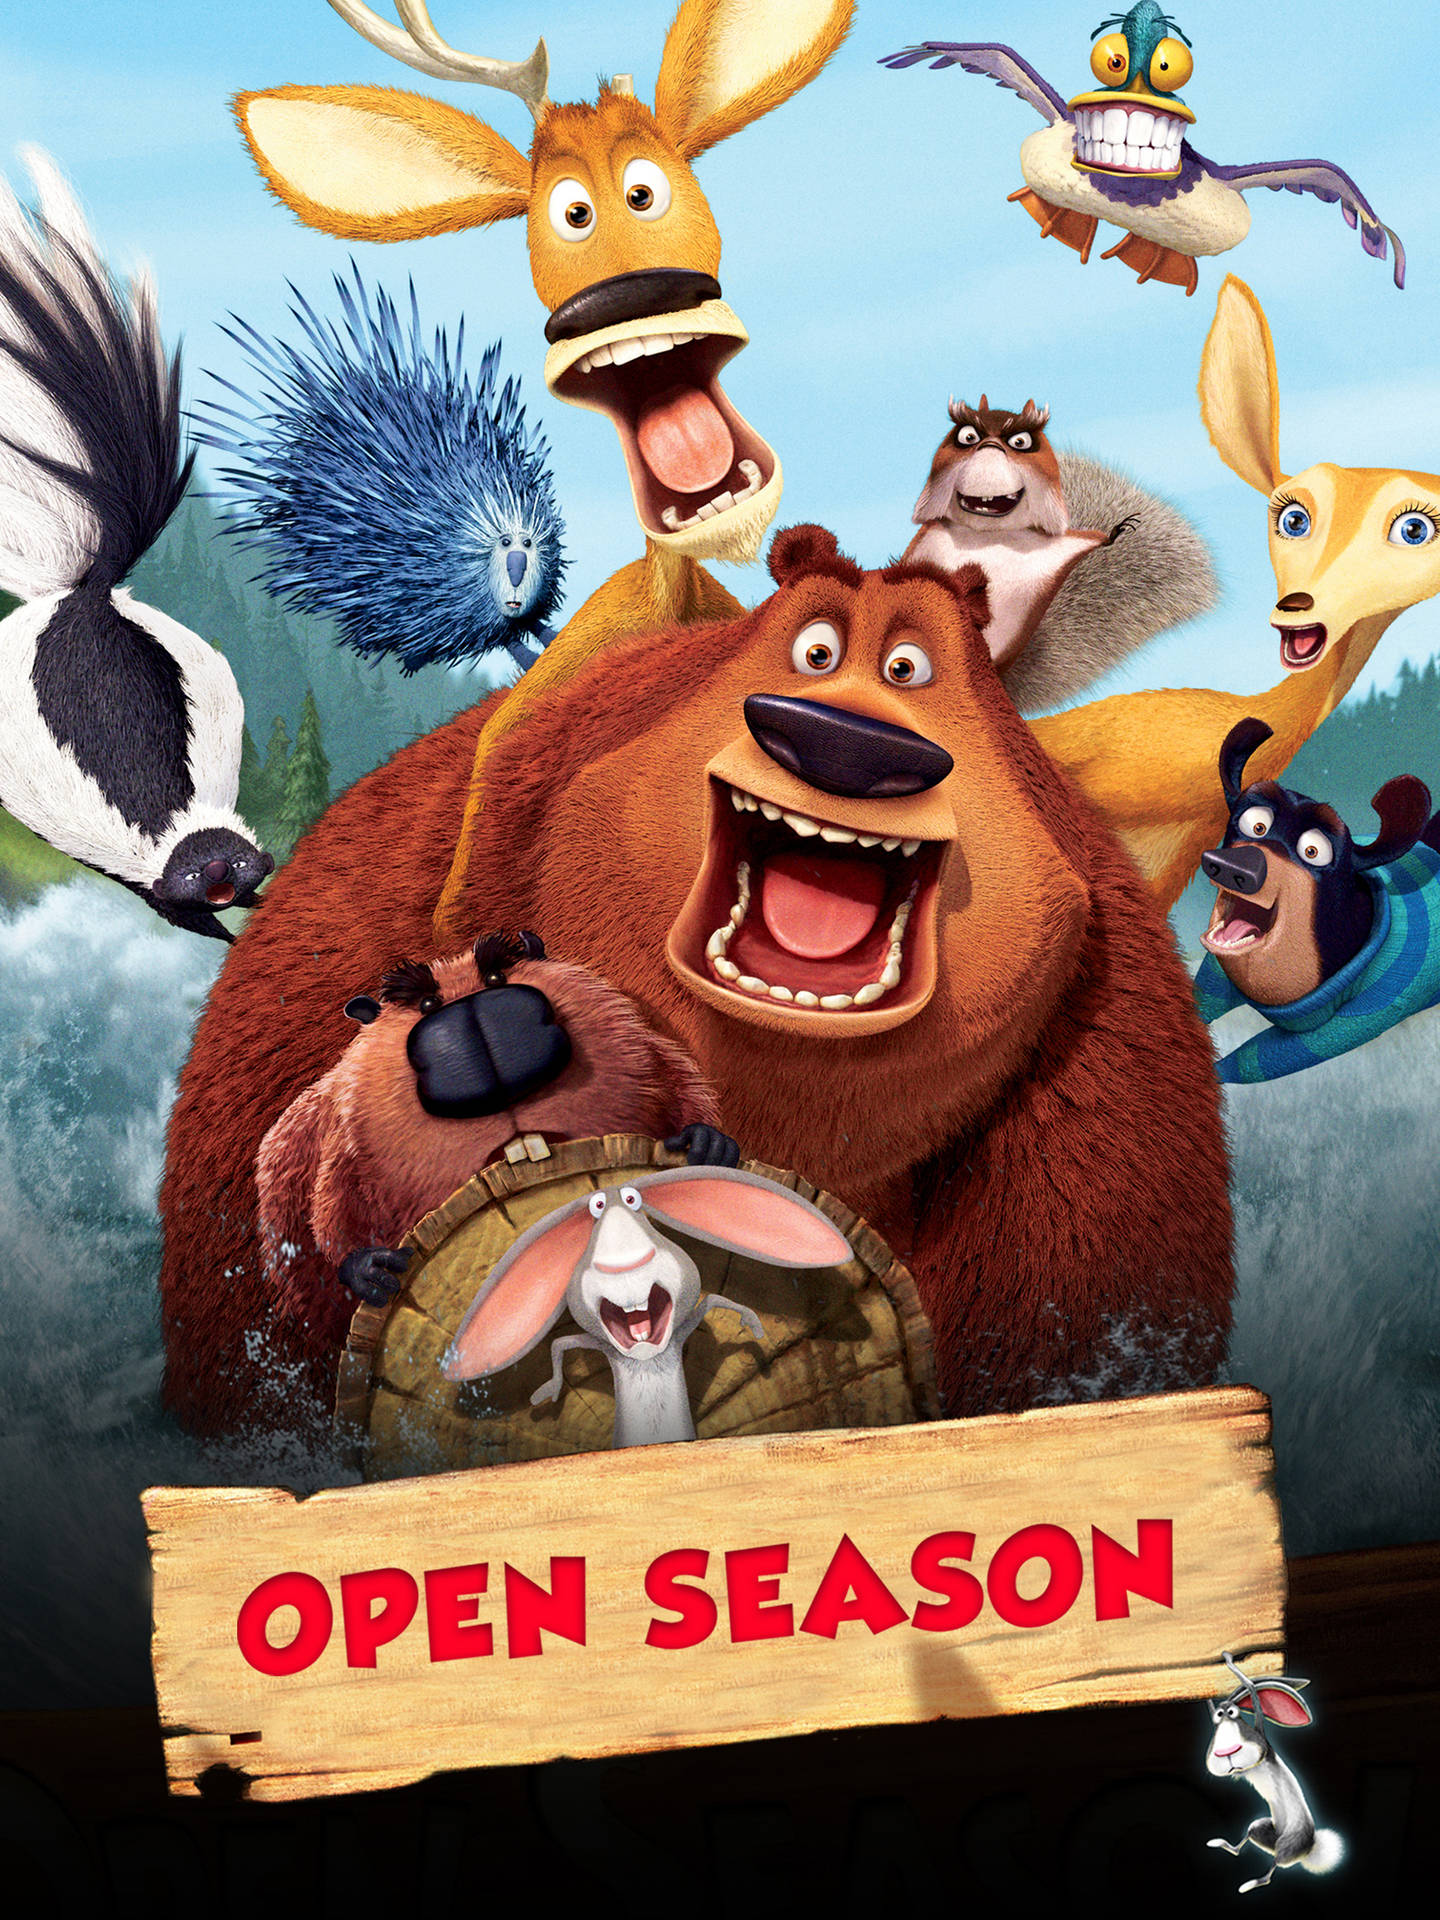 Download Open Season Animated Movie Characters Wallpaper 